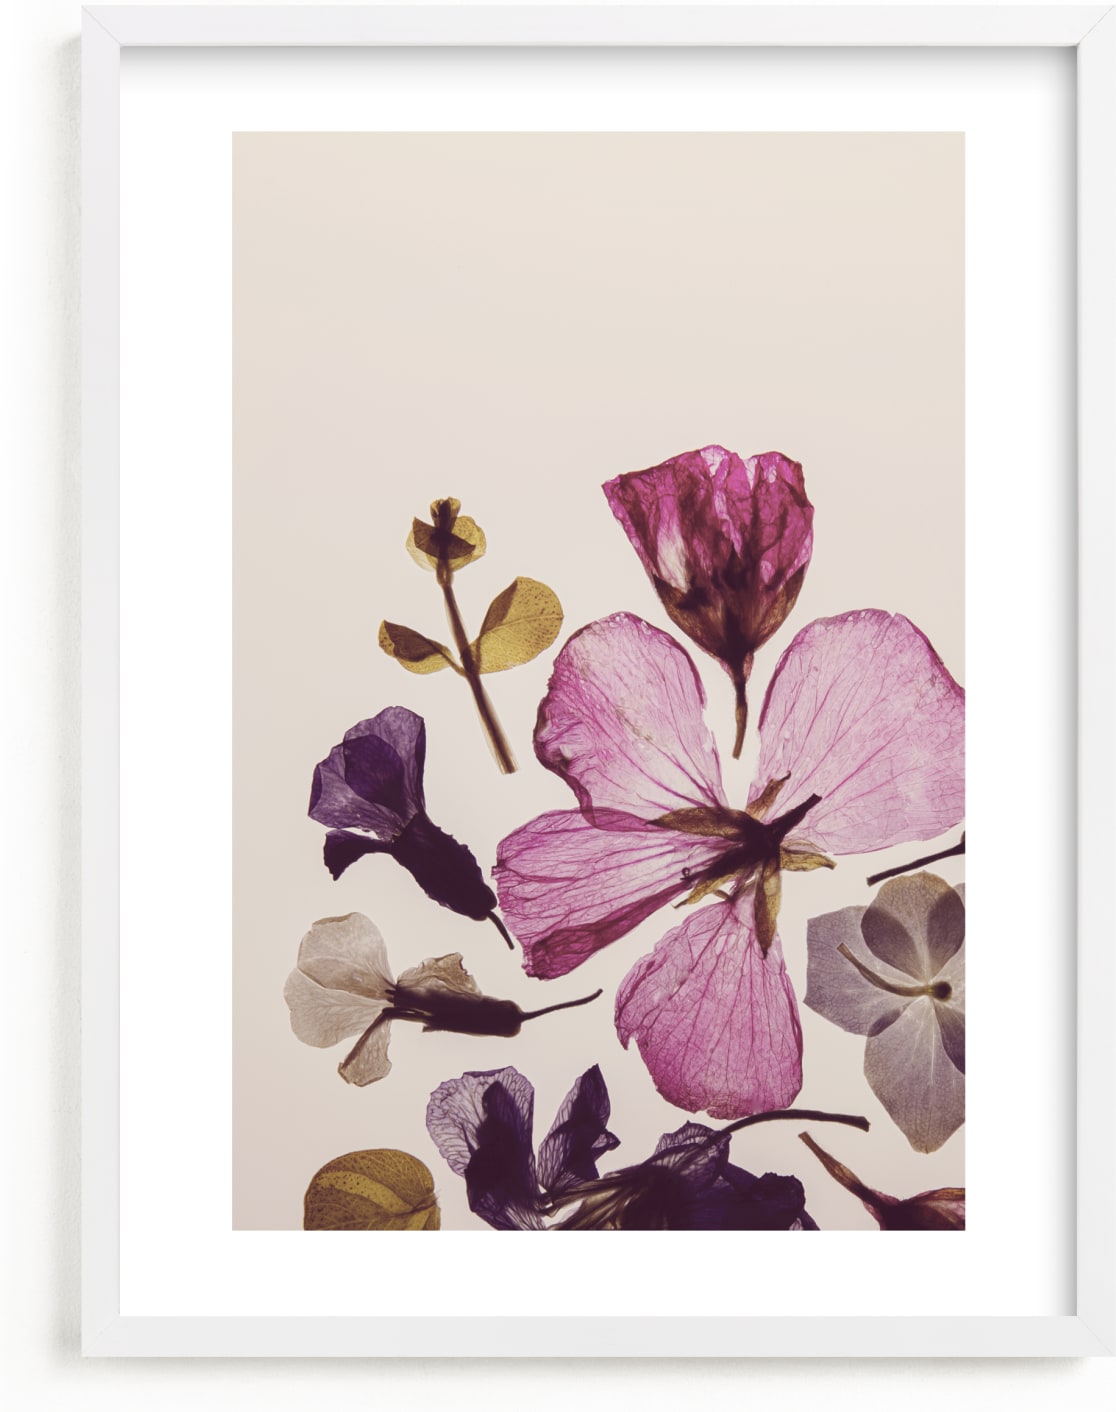 This is a purple kids wall art by Karen Kardatzke called Forever in Bloom.